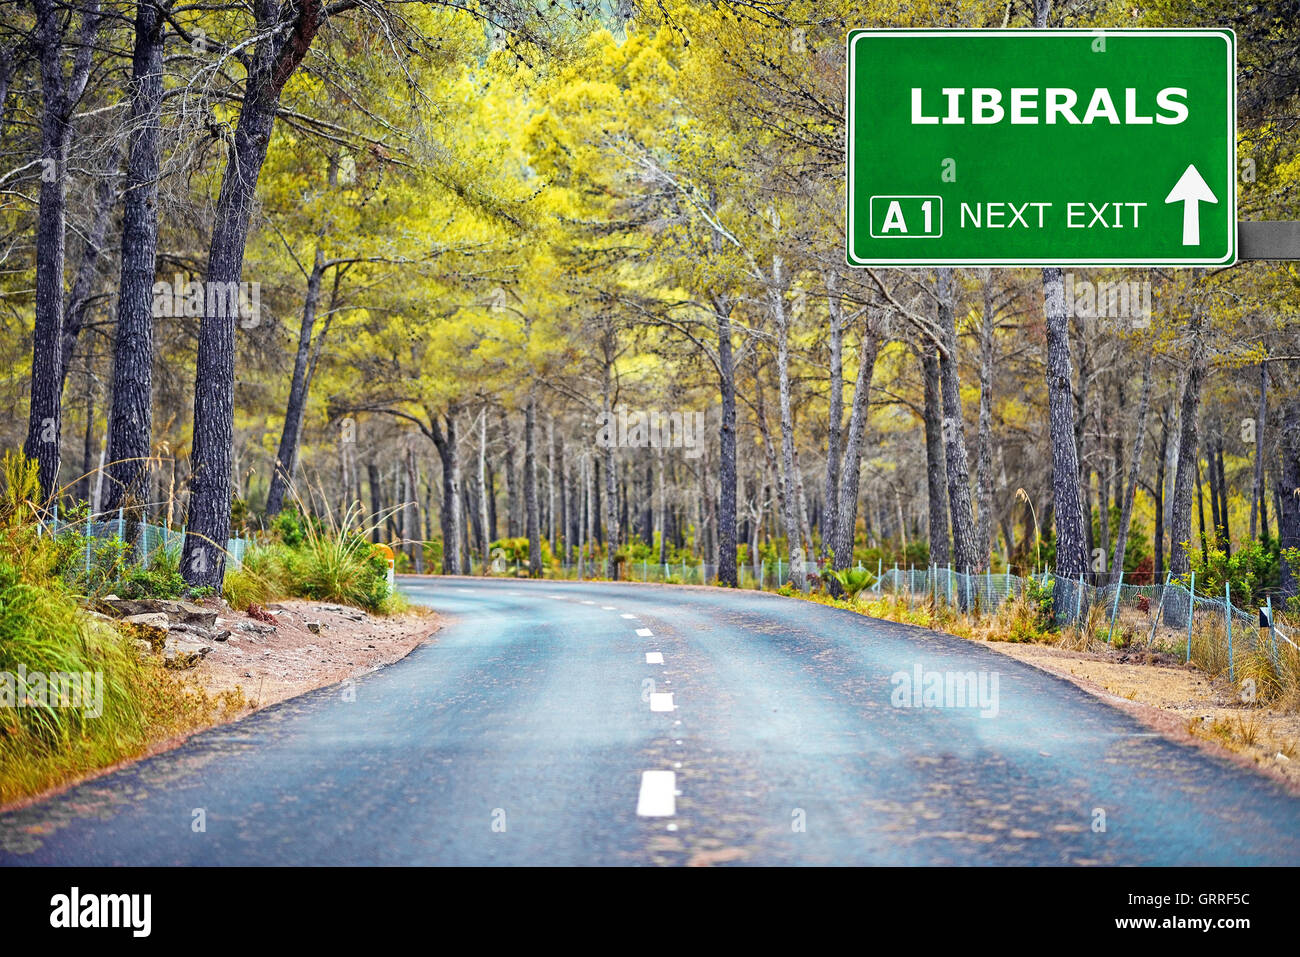 LIBERALS road sign against clear blue sky Stock Photo